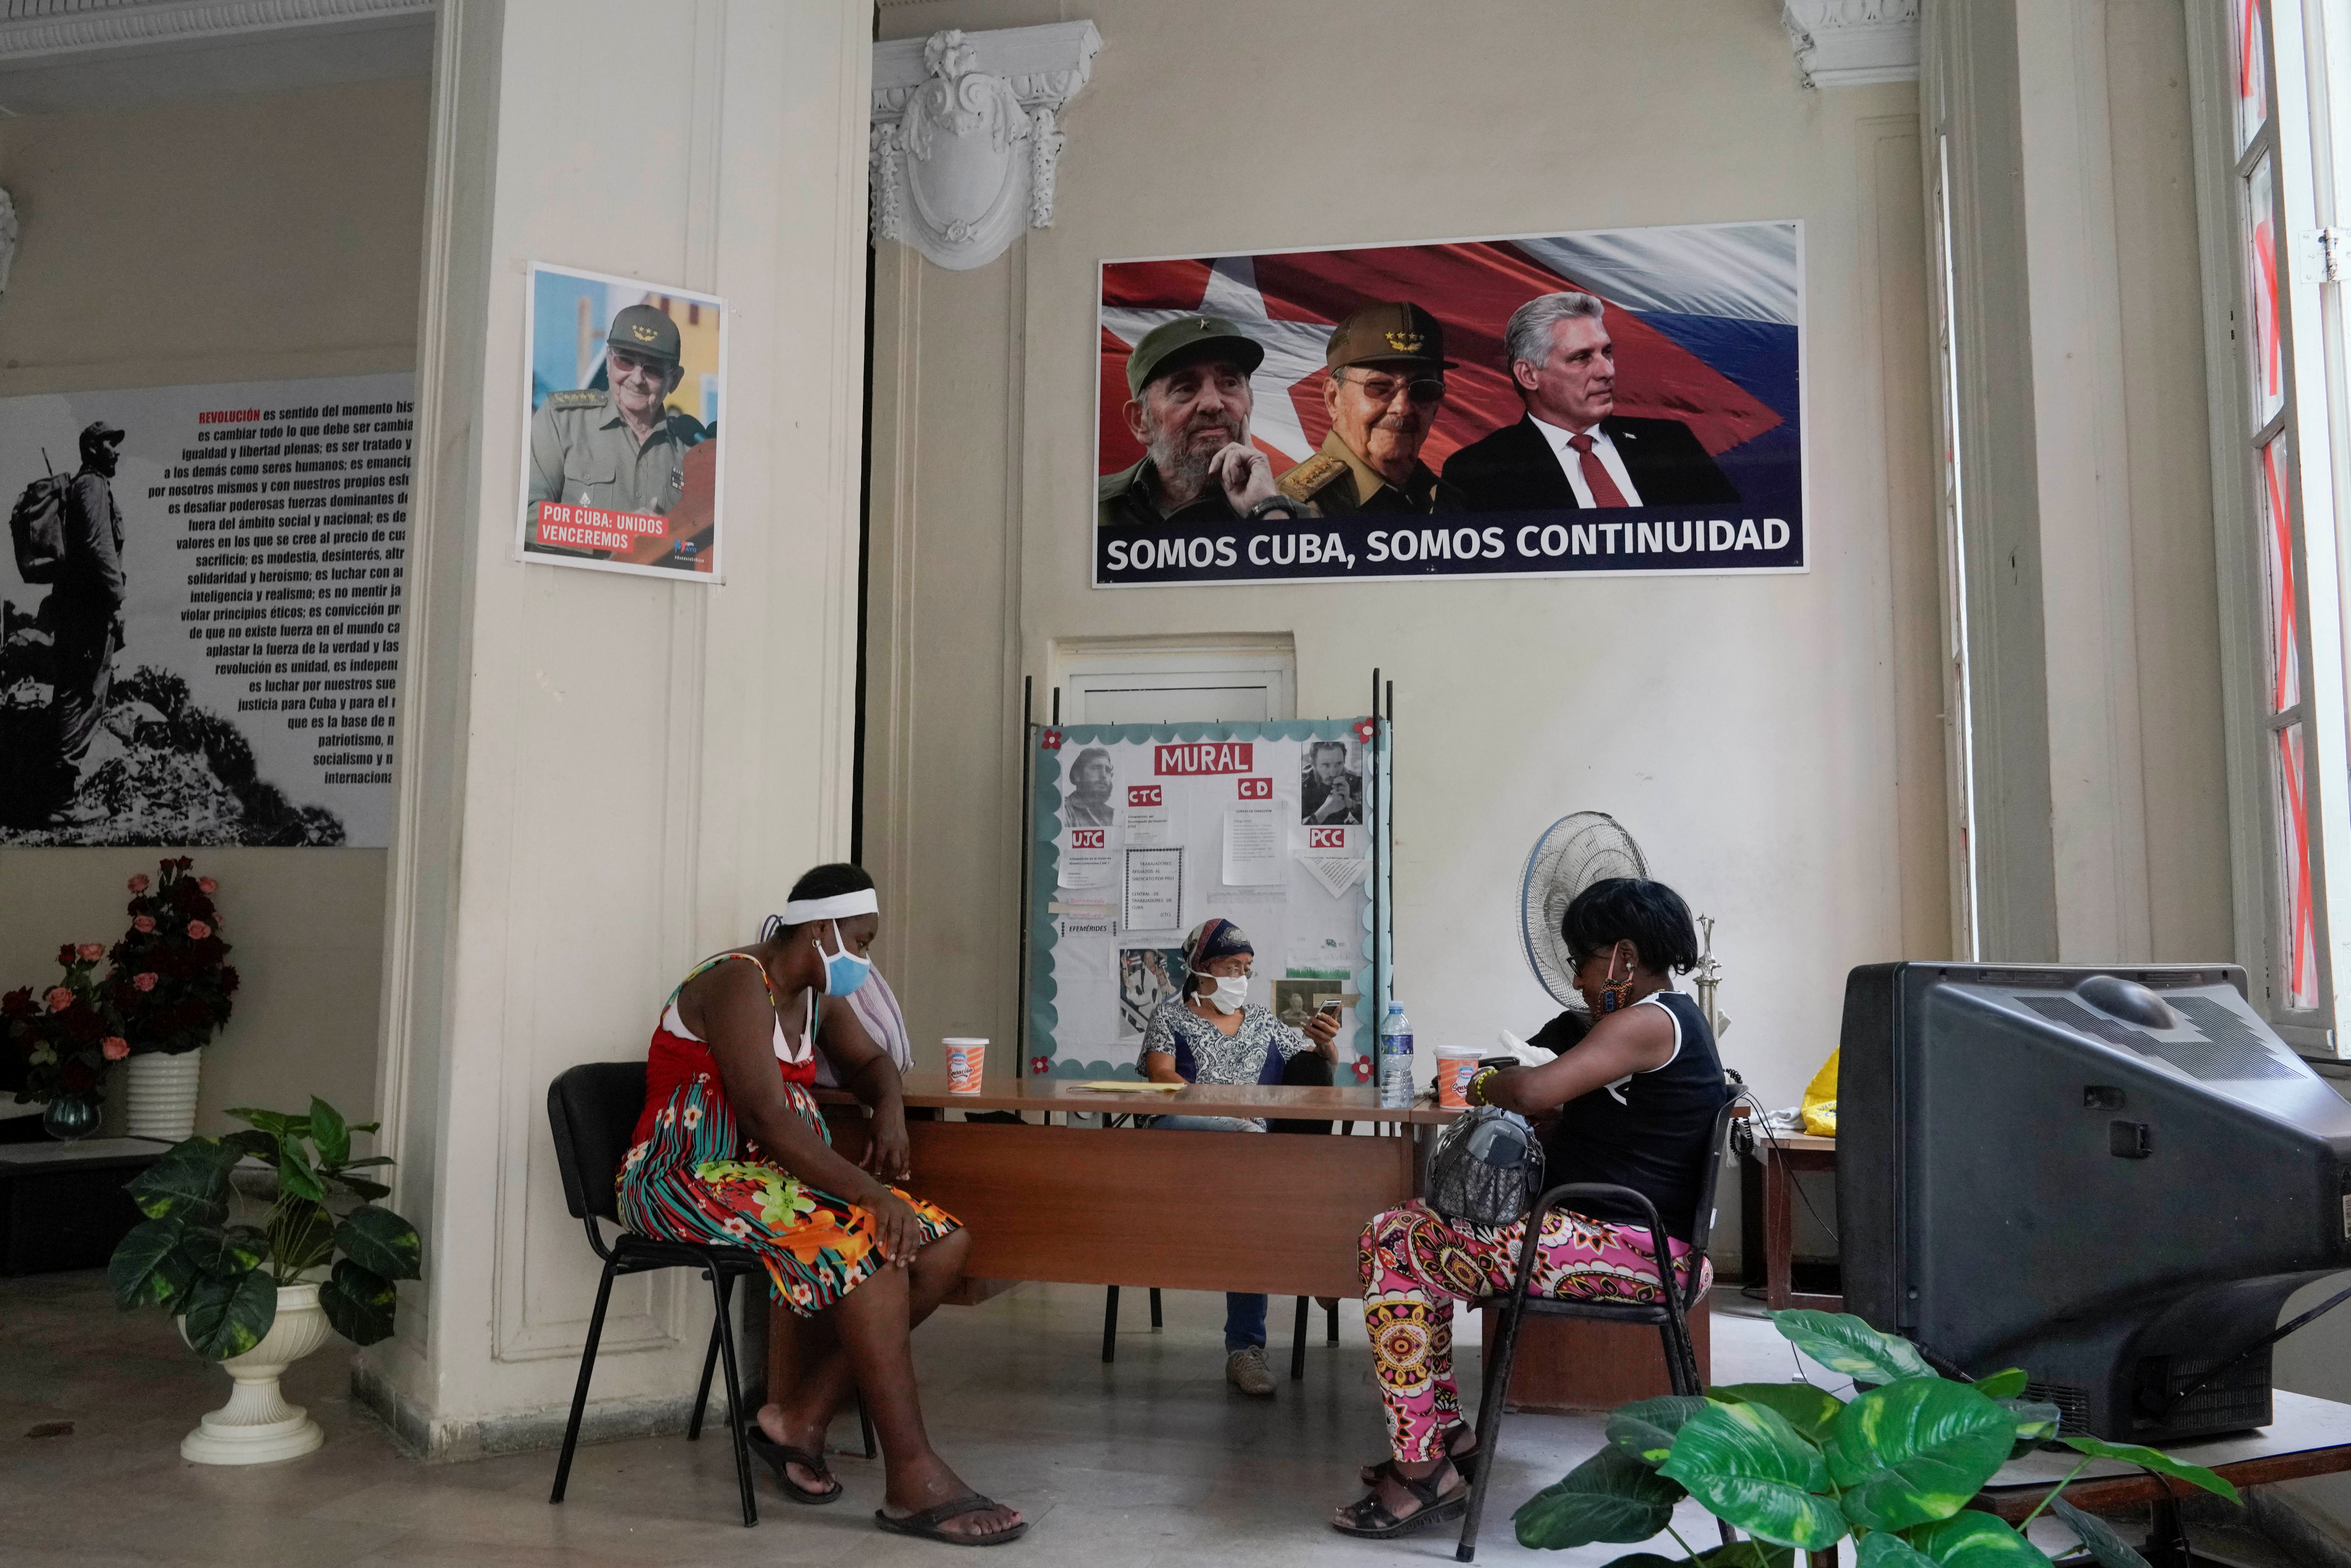 People sit under a poster with images of Fidel Castro, Raul Castro and Miguel Diaz-Canel in Havana